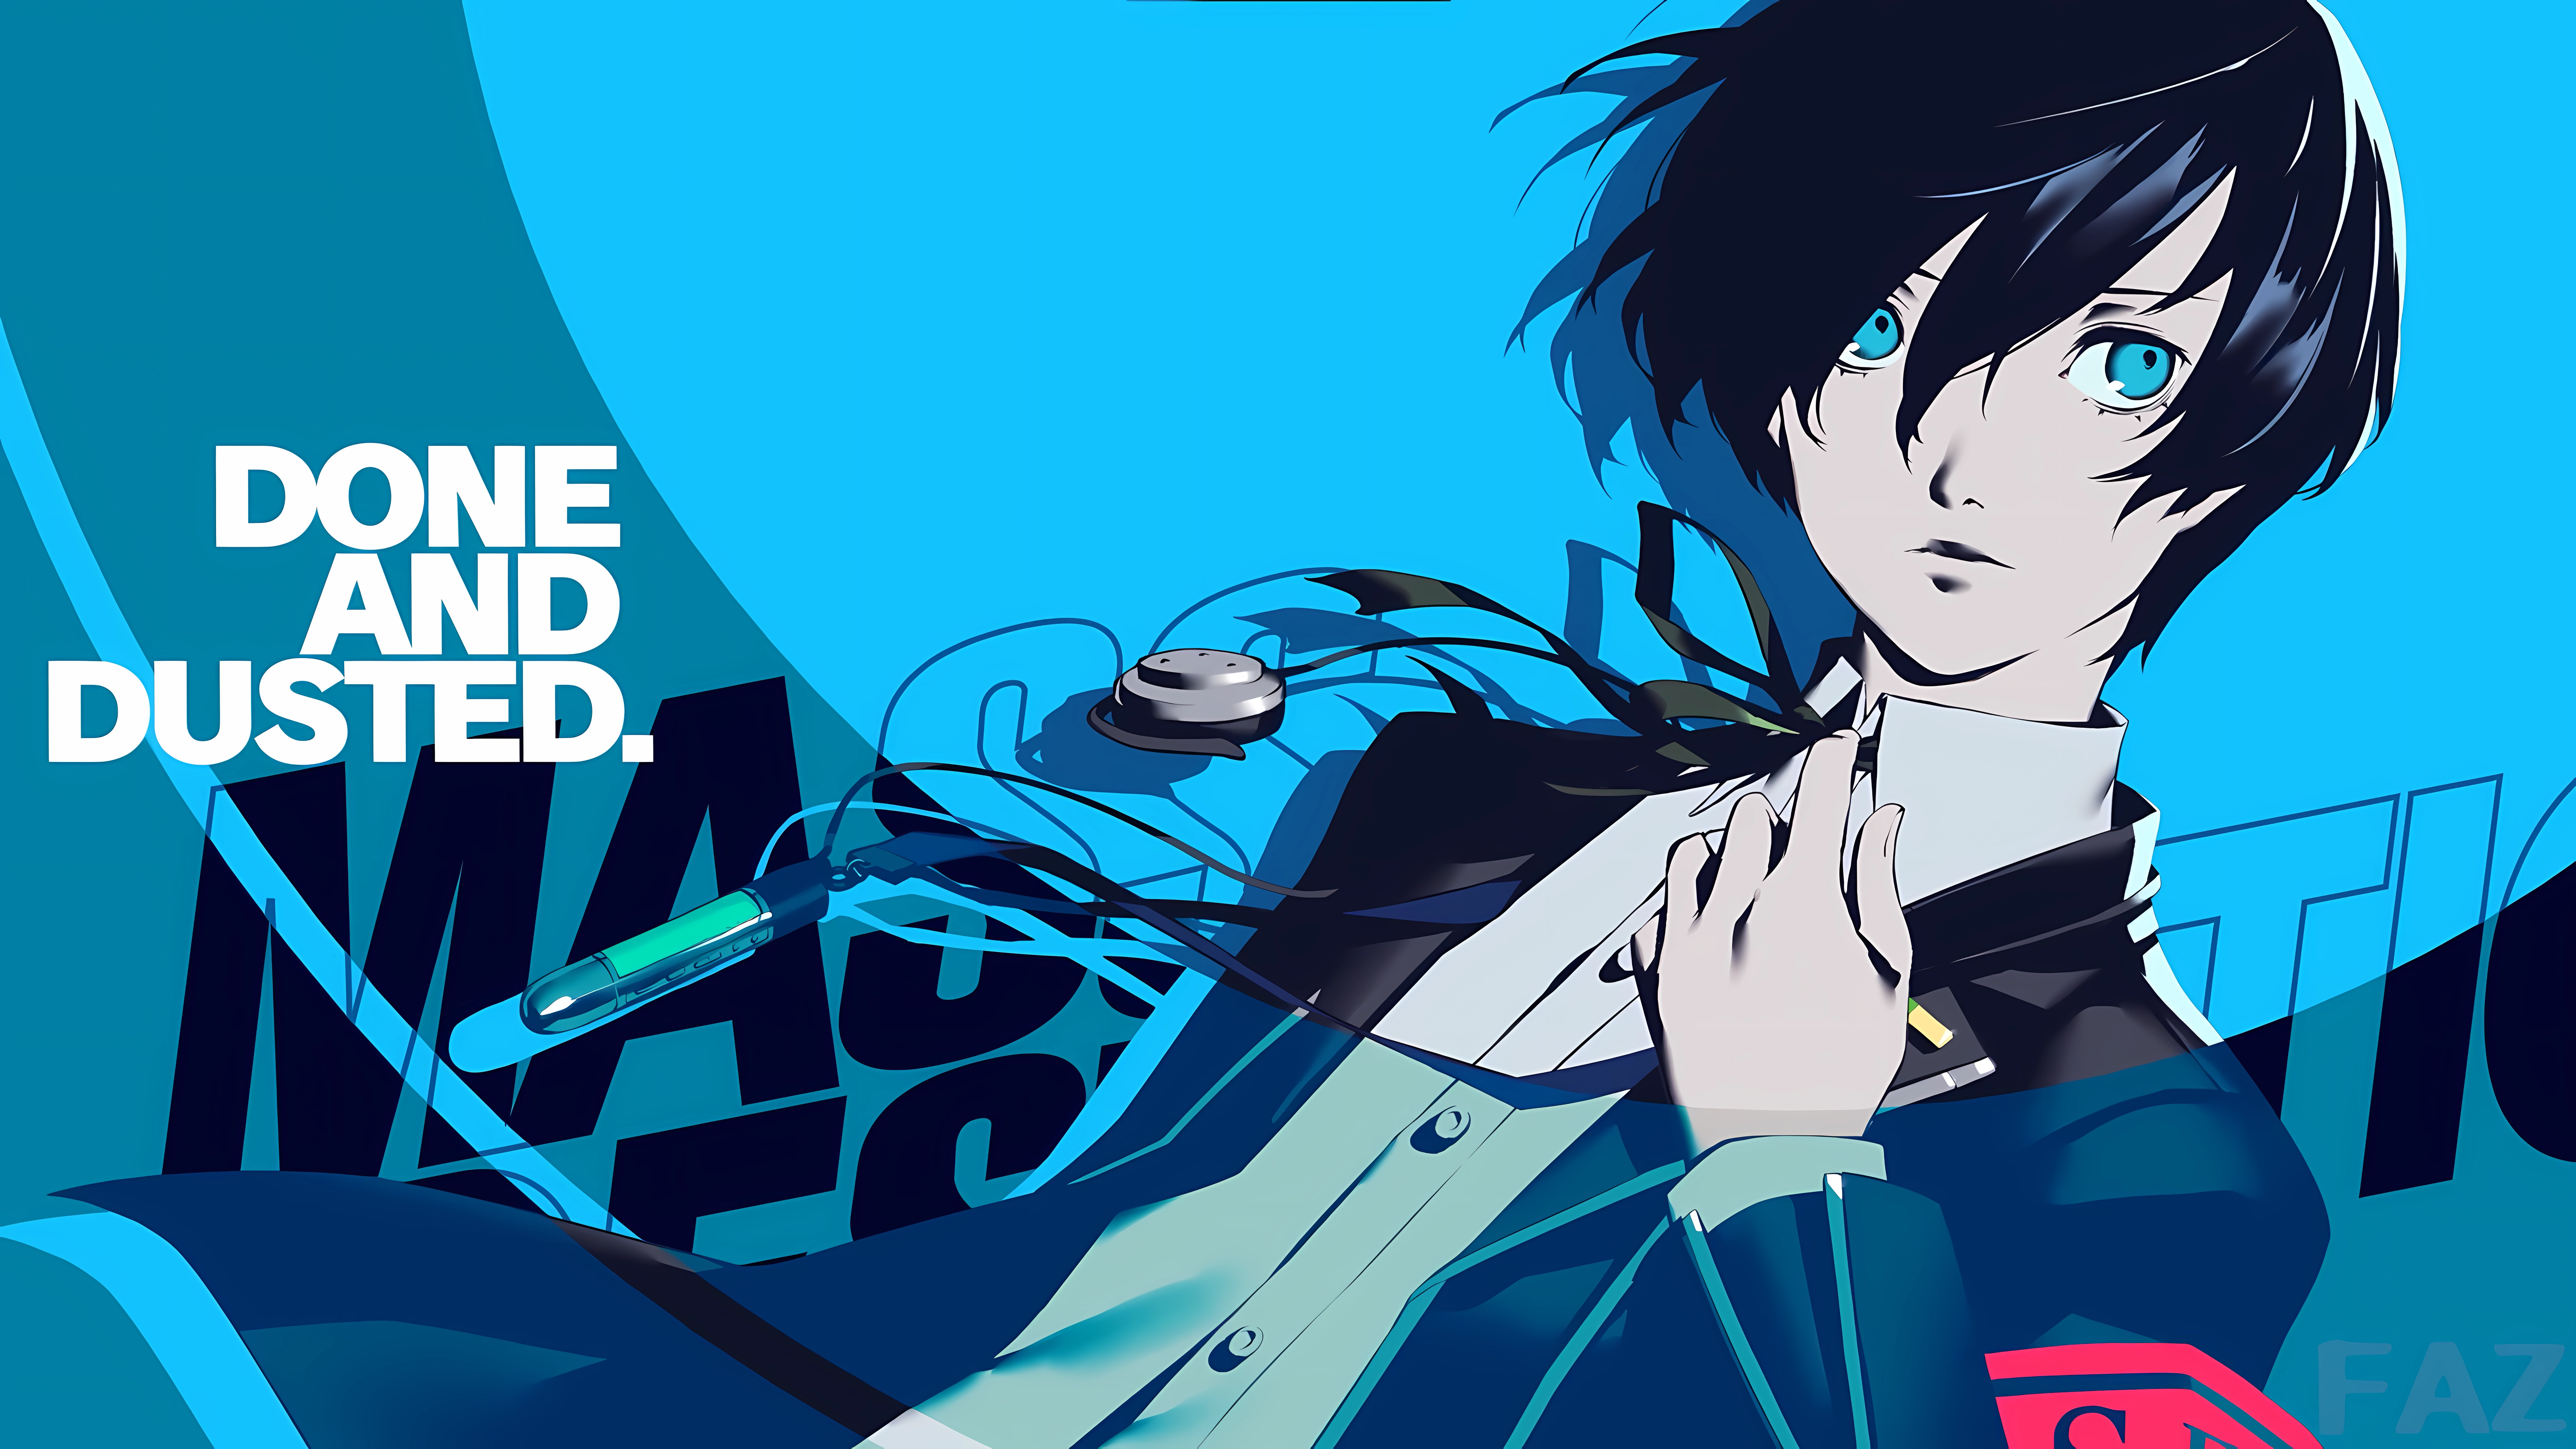 Anime 7680x4320 Persona 3 Persona 3 Portable anime boys video games RPG Japanese Art video game art Persona series